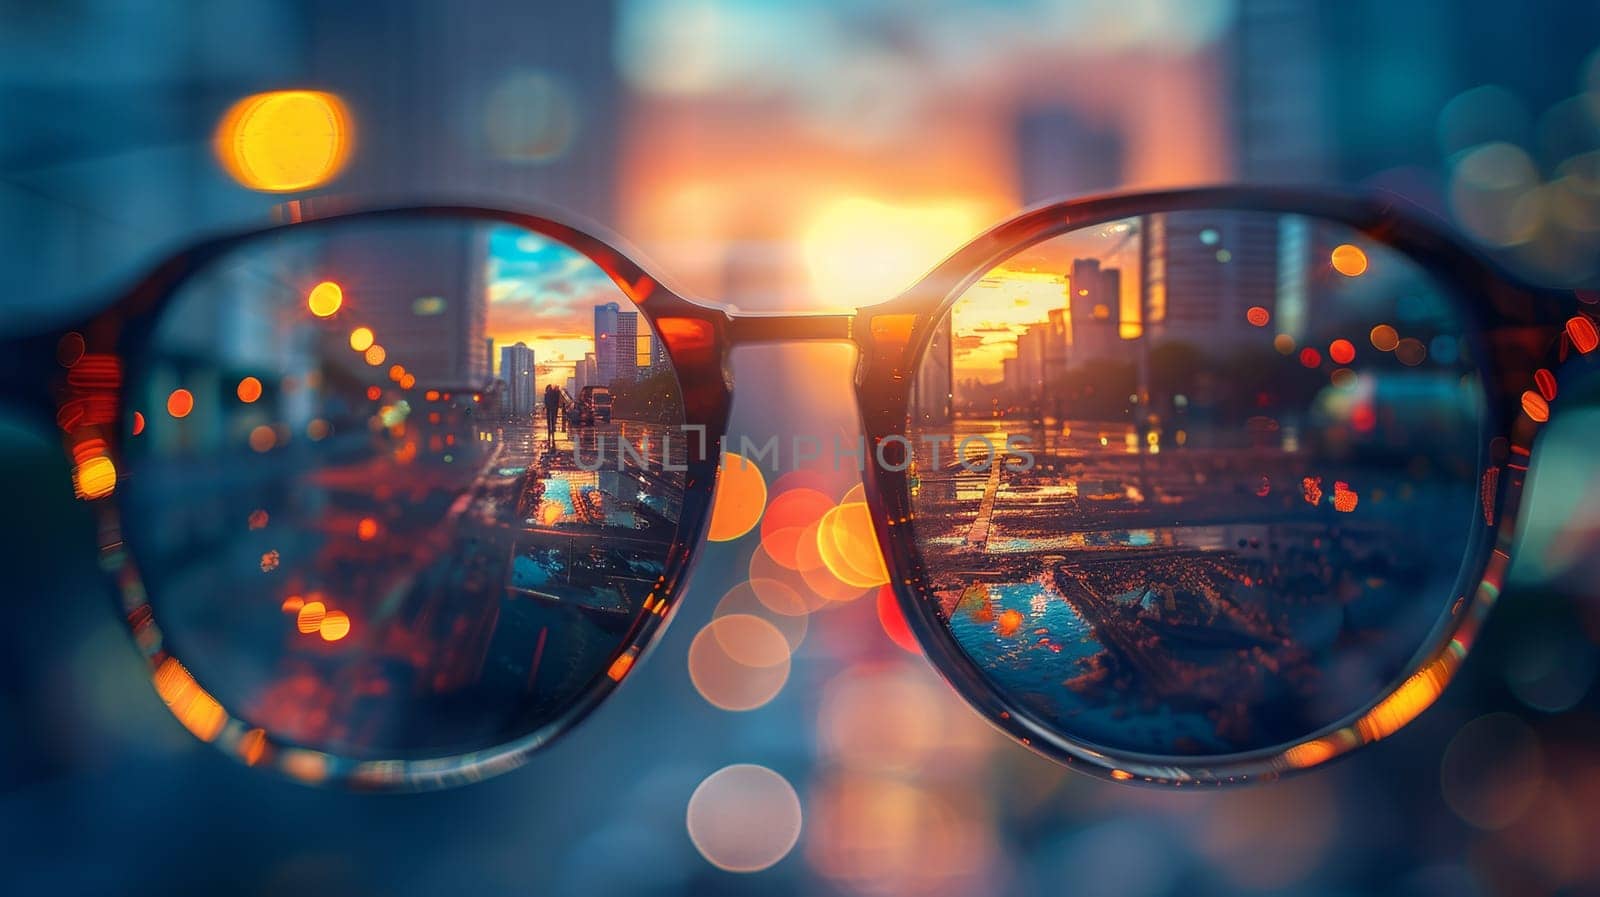 Sunglasses on the background of the city at sunset. by ailike